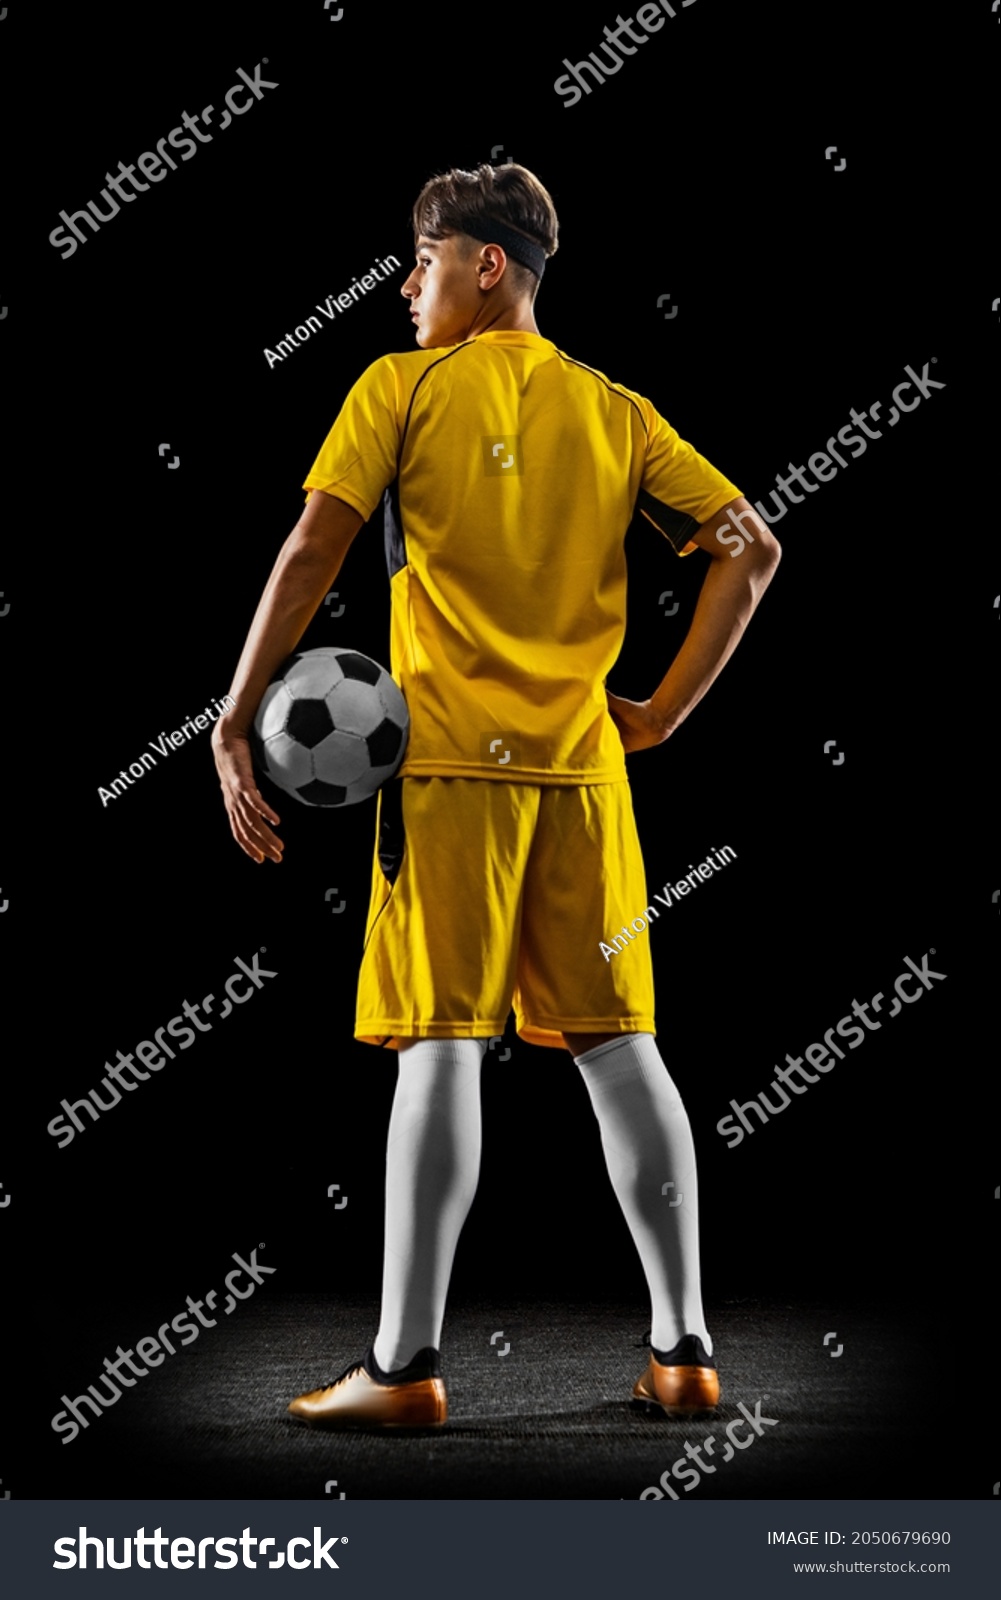 Back view full-length portrait of young handsome football player in yellow uniform isolated over black background. Concept of action, team sport game, energy, vitality. Copy space for ad. #2050679690